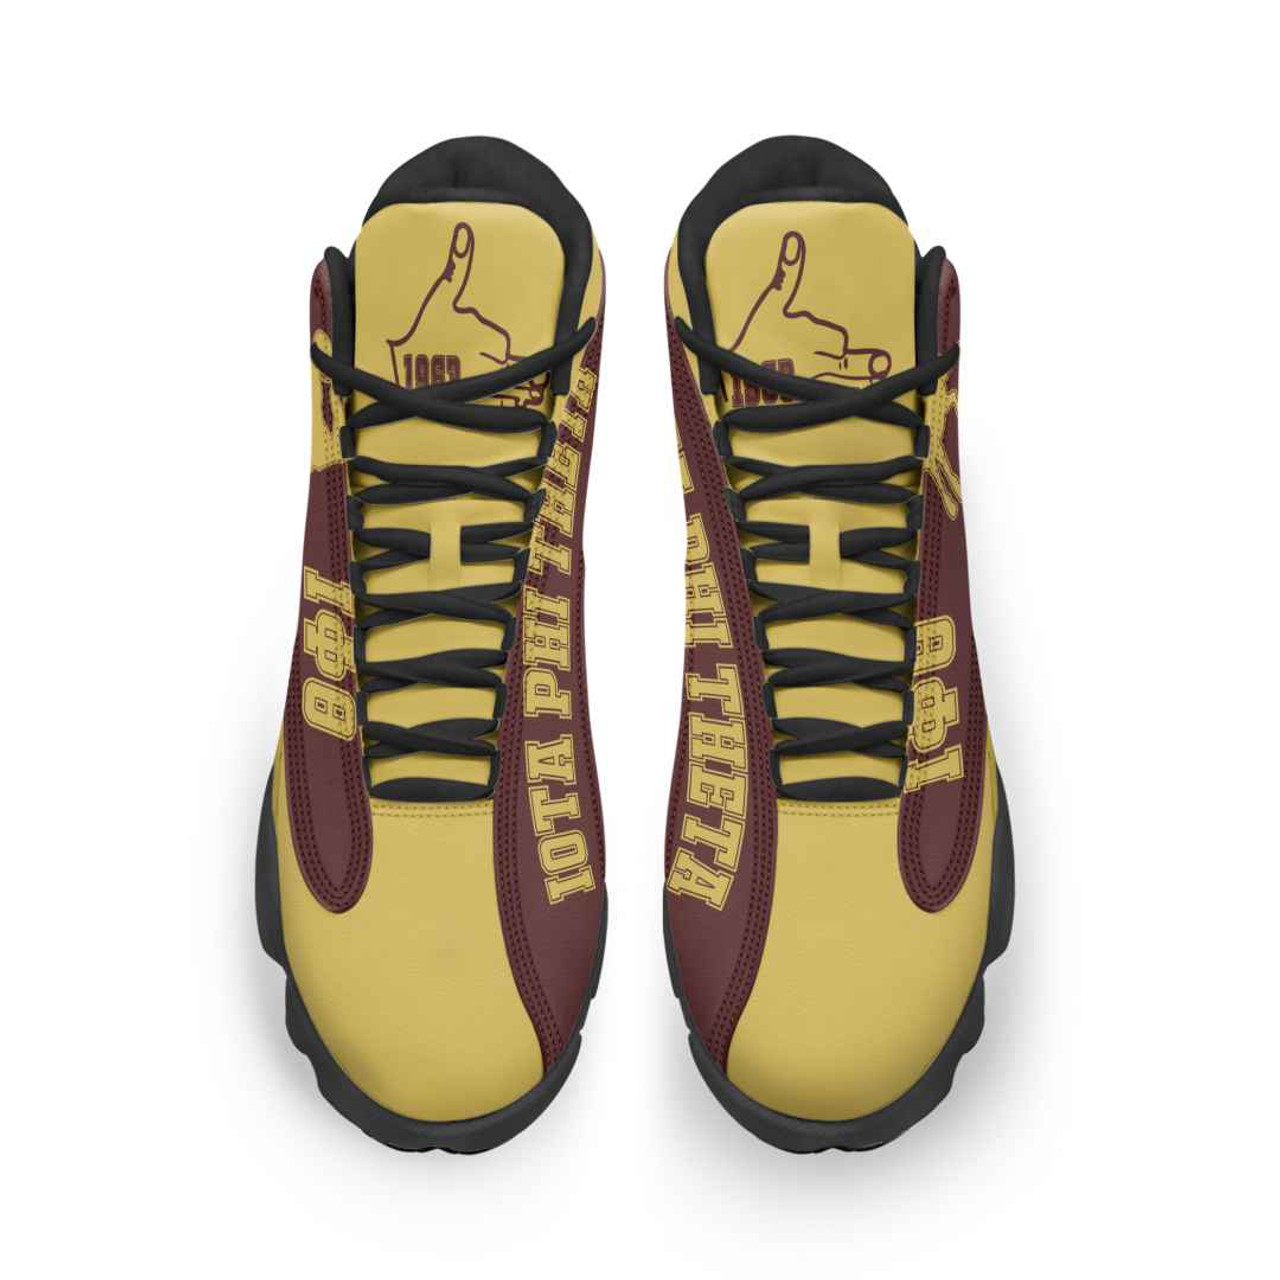 Iota Phi Theta High Top Basketball Shoes J 13 - Fraternity Centaur With Hand Gesture High Top Sneakers J 13